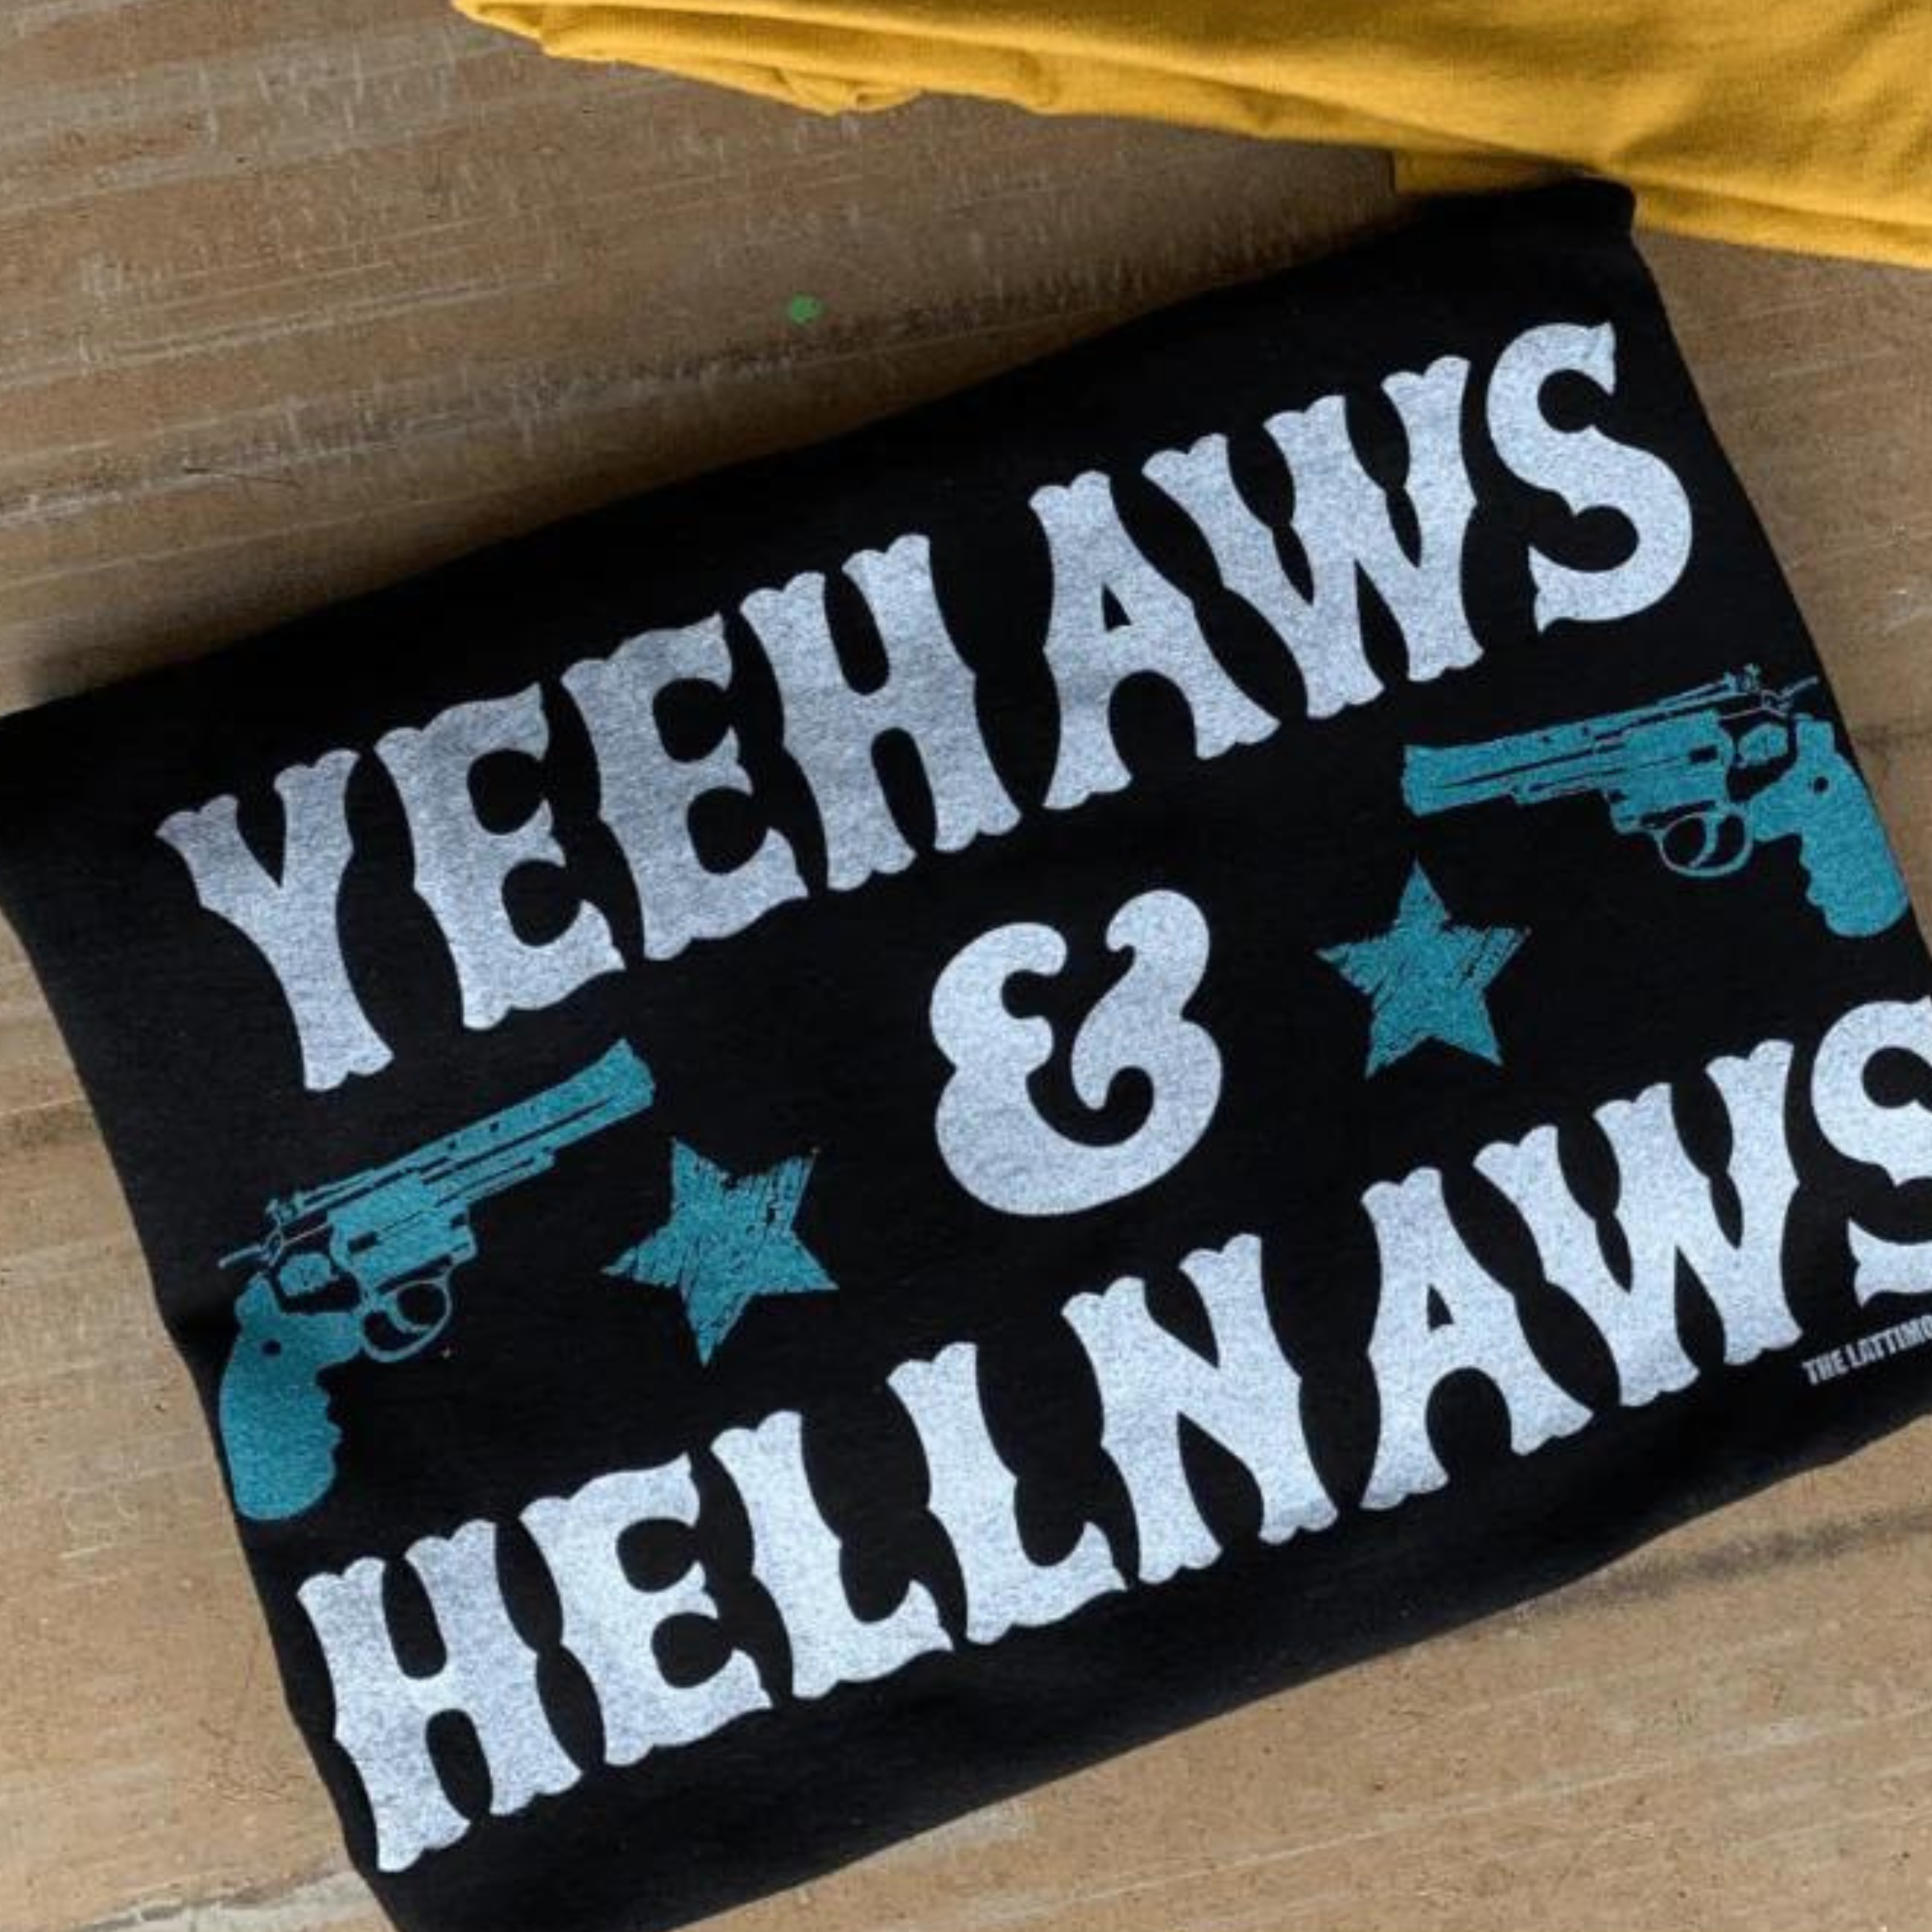 This black graphic tee includes a crew neckline, short sleeves, and cute hand drawn design of two turquoise guns and stars on either side of the & in the saying "YEEHAWS & HELLNAWS" which is stacked. This tee is shown in this photo as a folded flat lay.